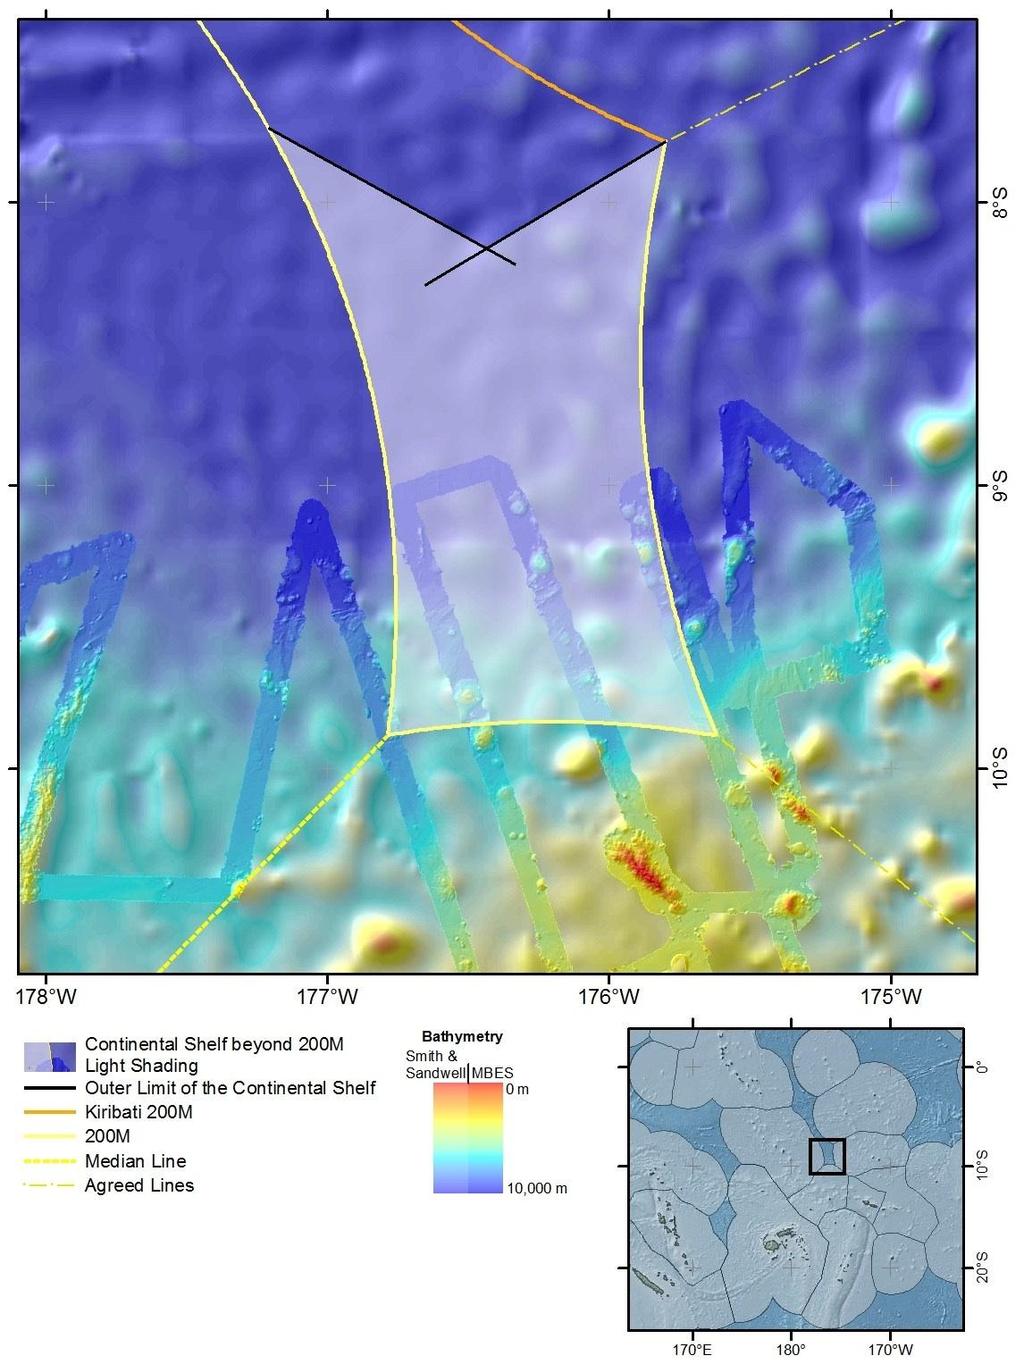 Figure 1: Map illustrating the outer limits of the continental shelf showing the outer limit